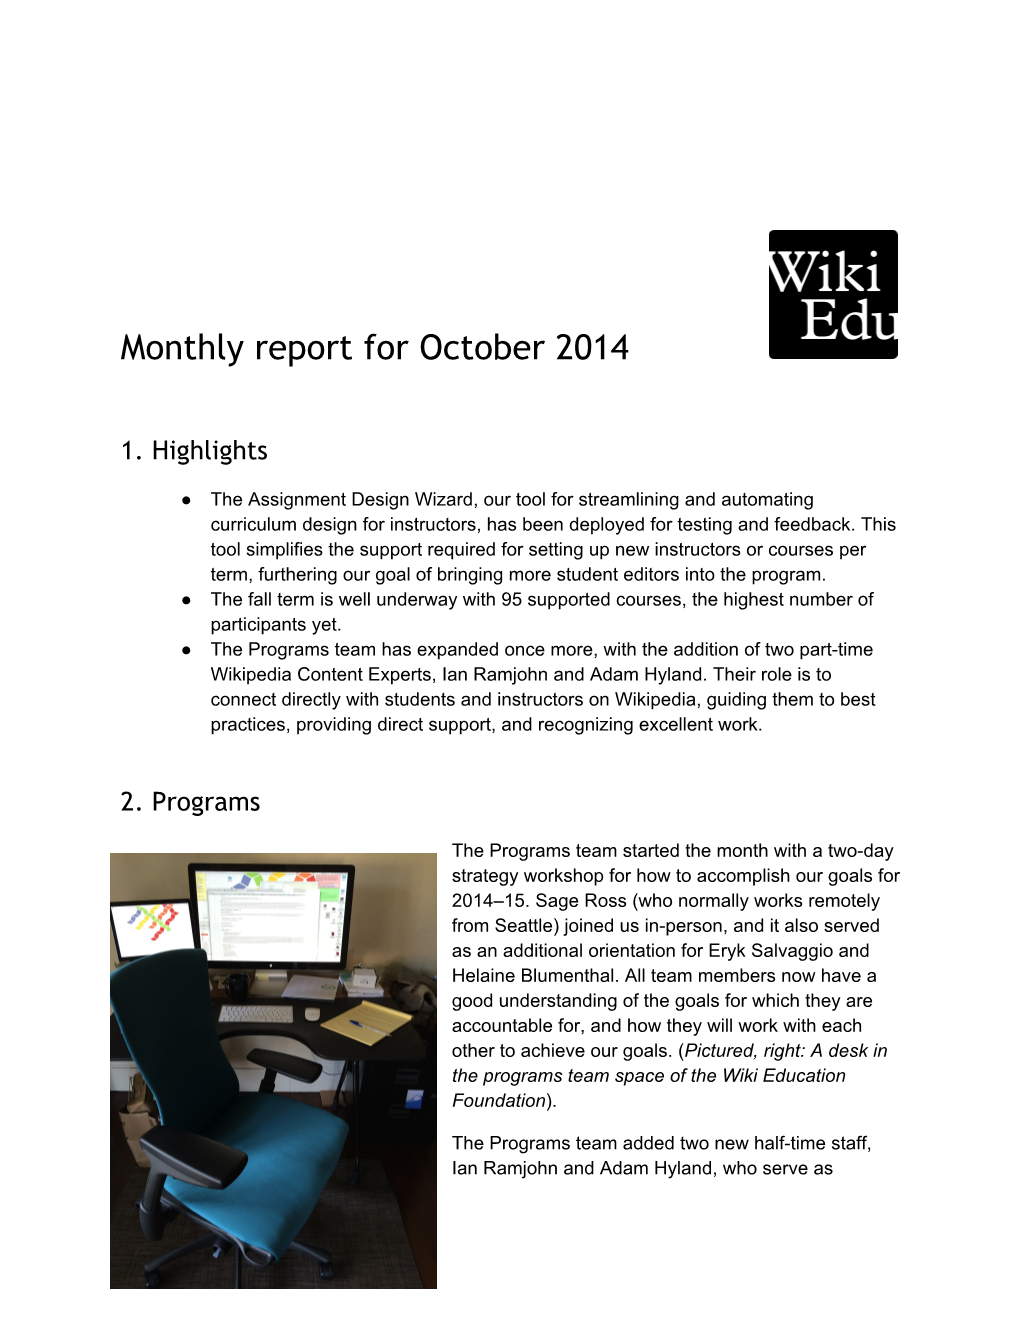 Monthly Report for October 2014